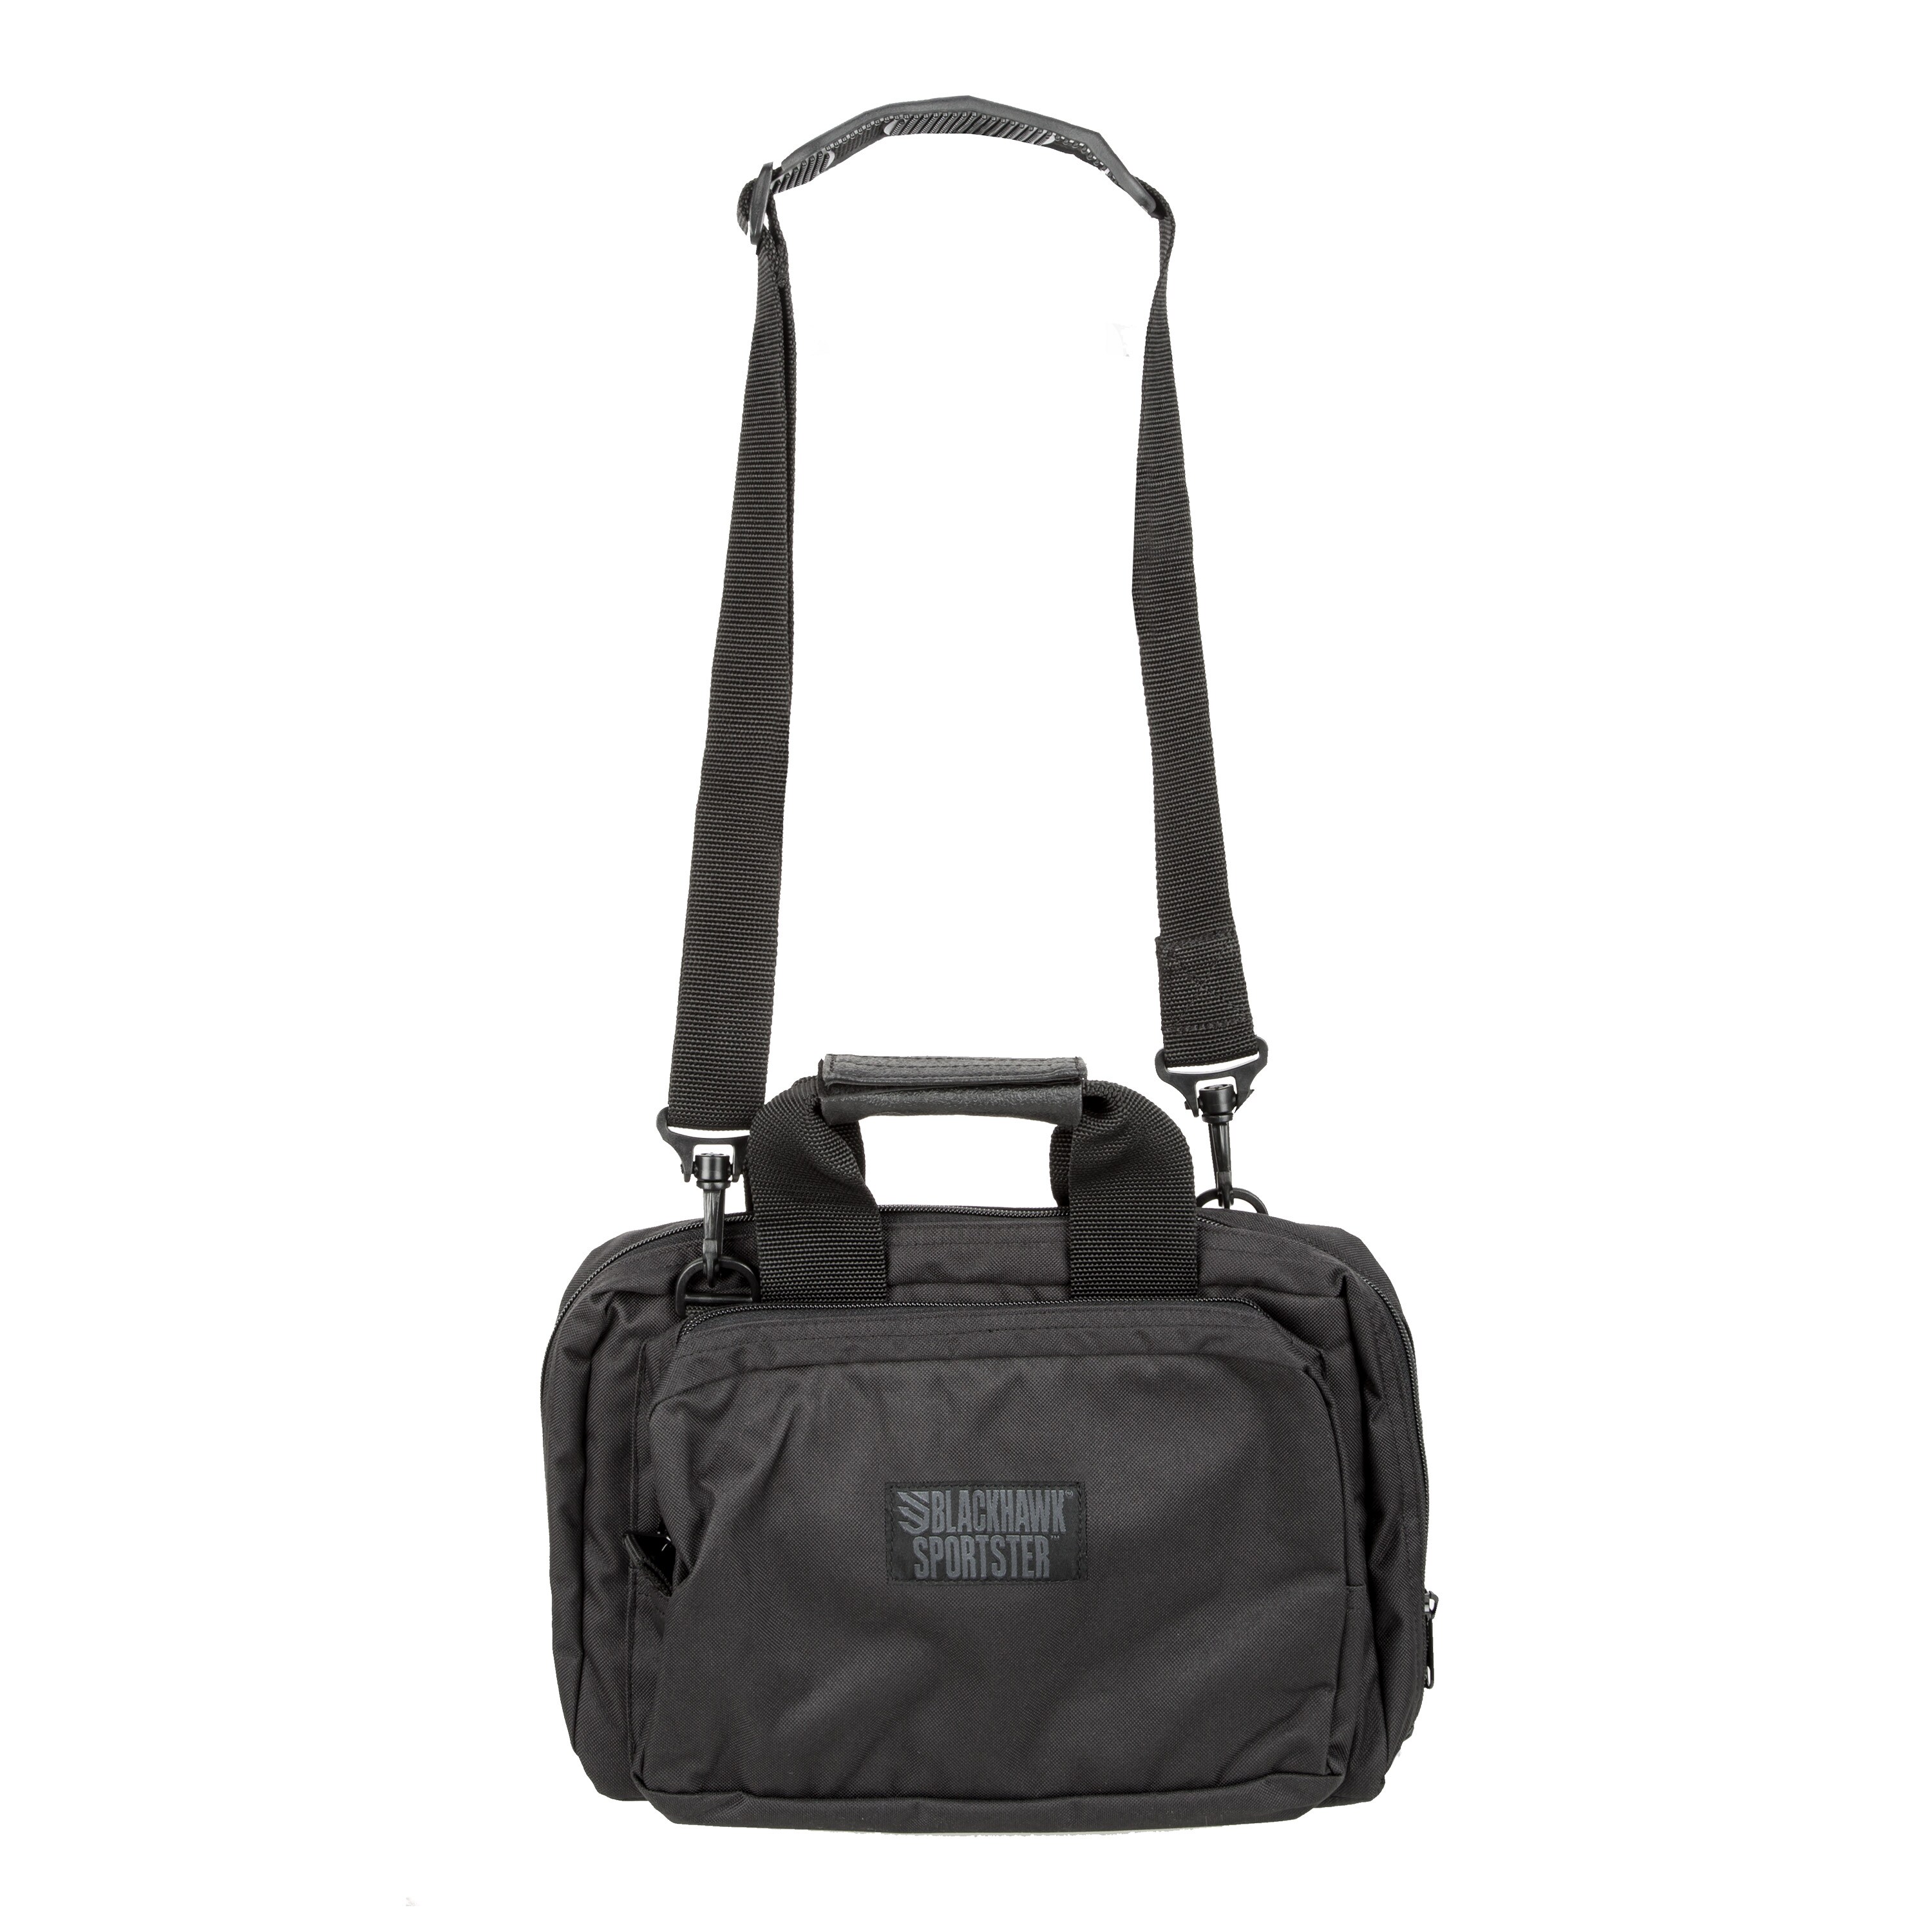 Purchase the Blackhawk Sportster Shooters Bag black by ASMC